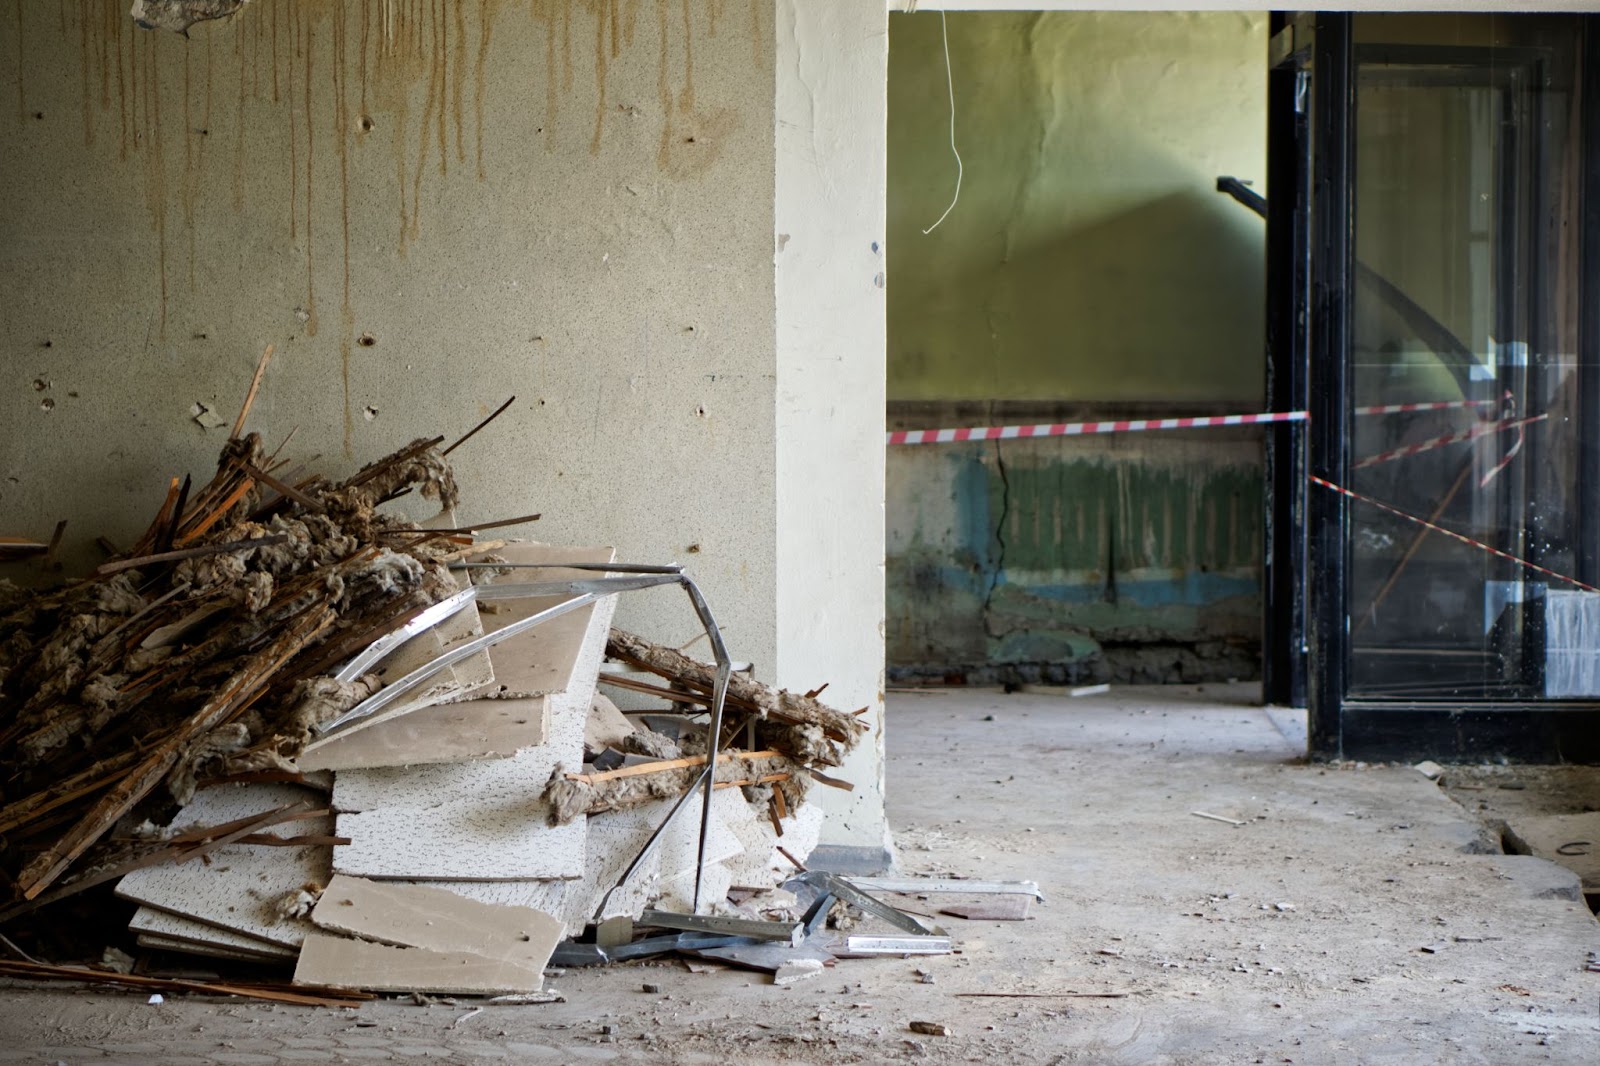 A pile of rubble in an abandoned room, showcasing the expertise of disaster restoration professionals.

